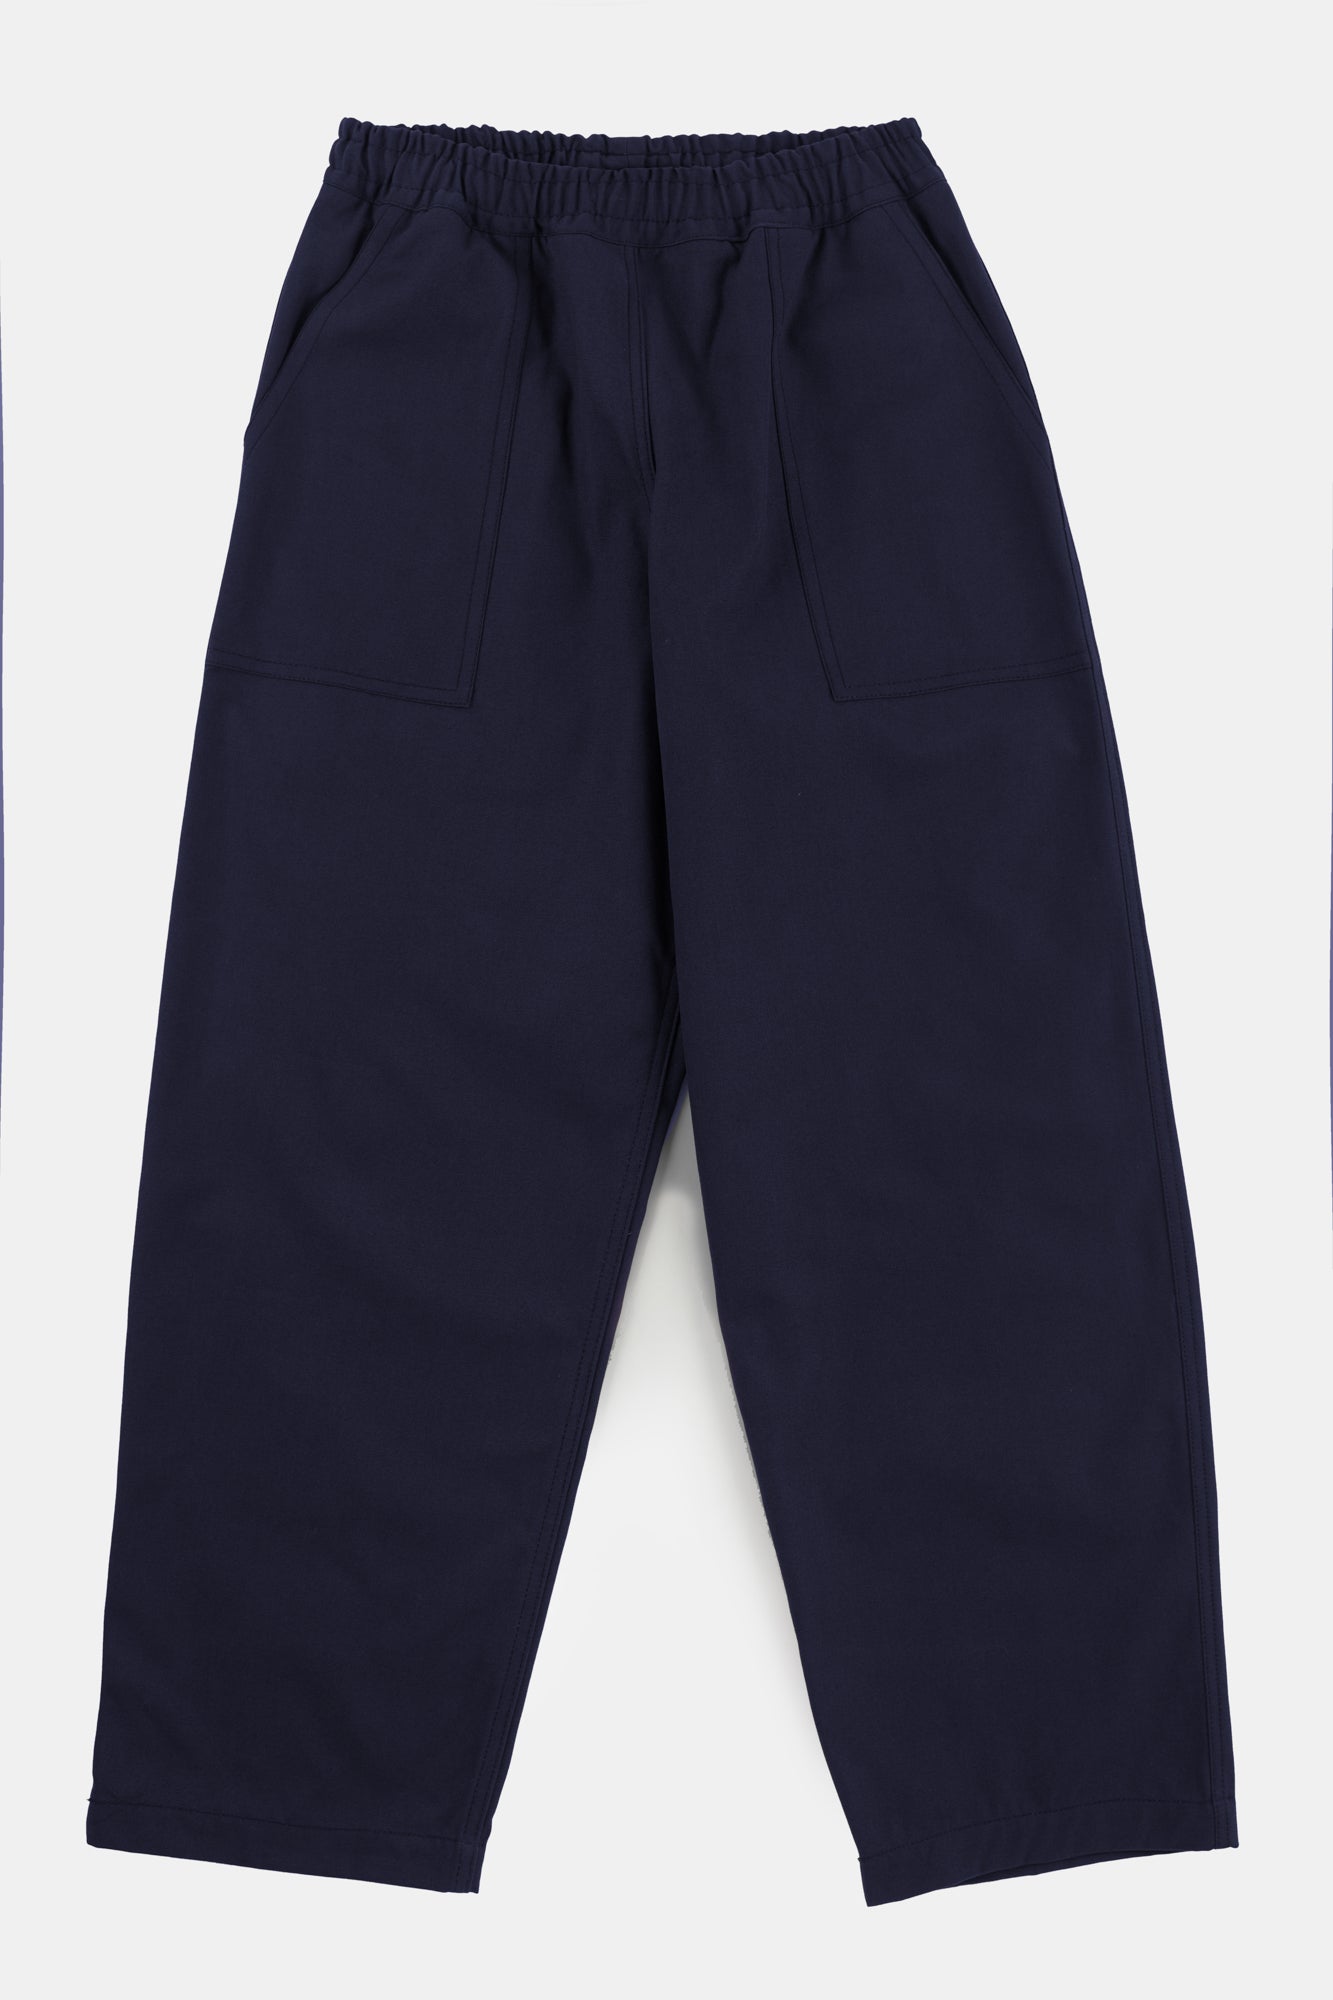 Cameraman Pant Drawstring Tapered Cotton Canvas Trousers - Navy - Community  Clothing